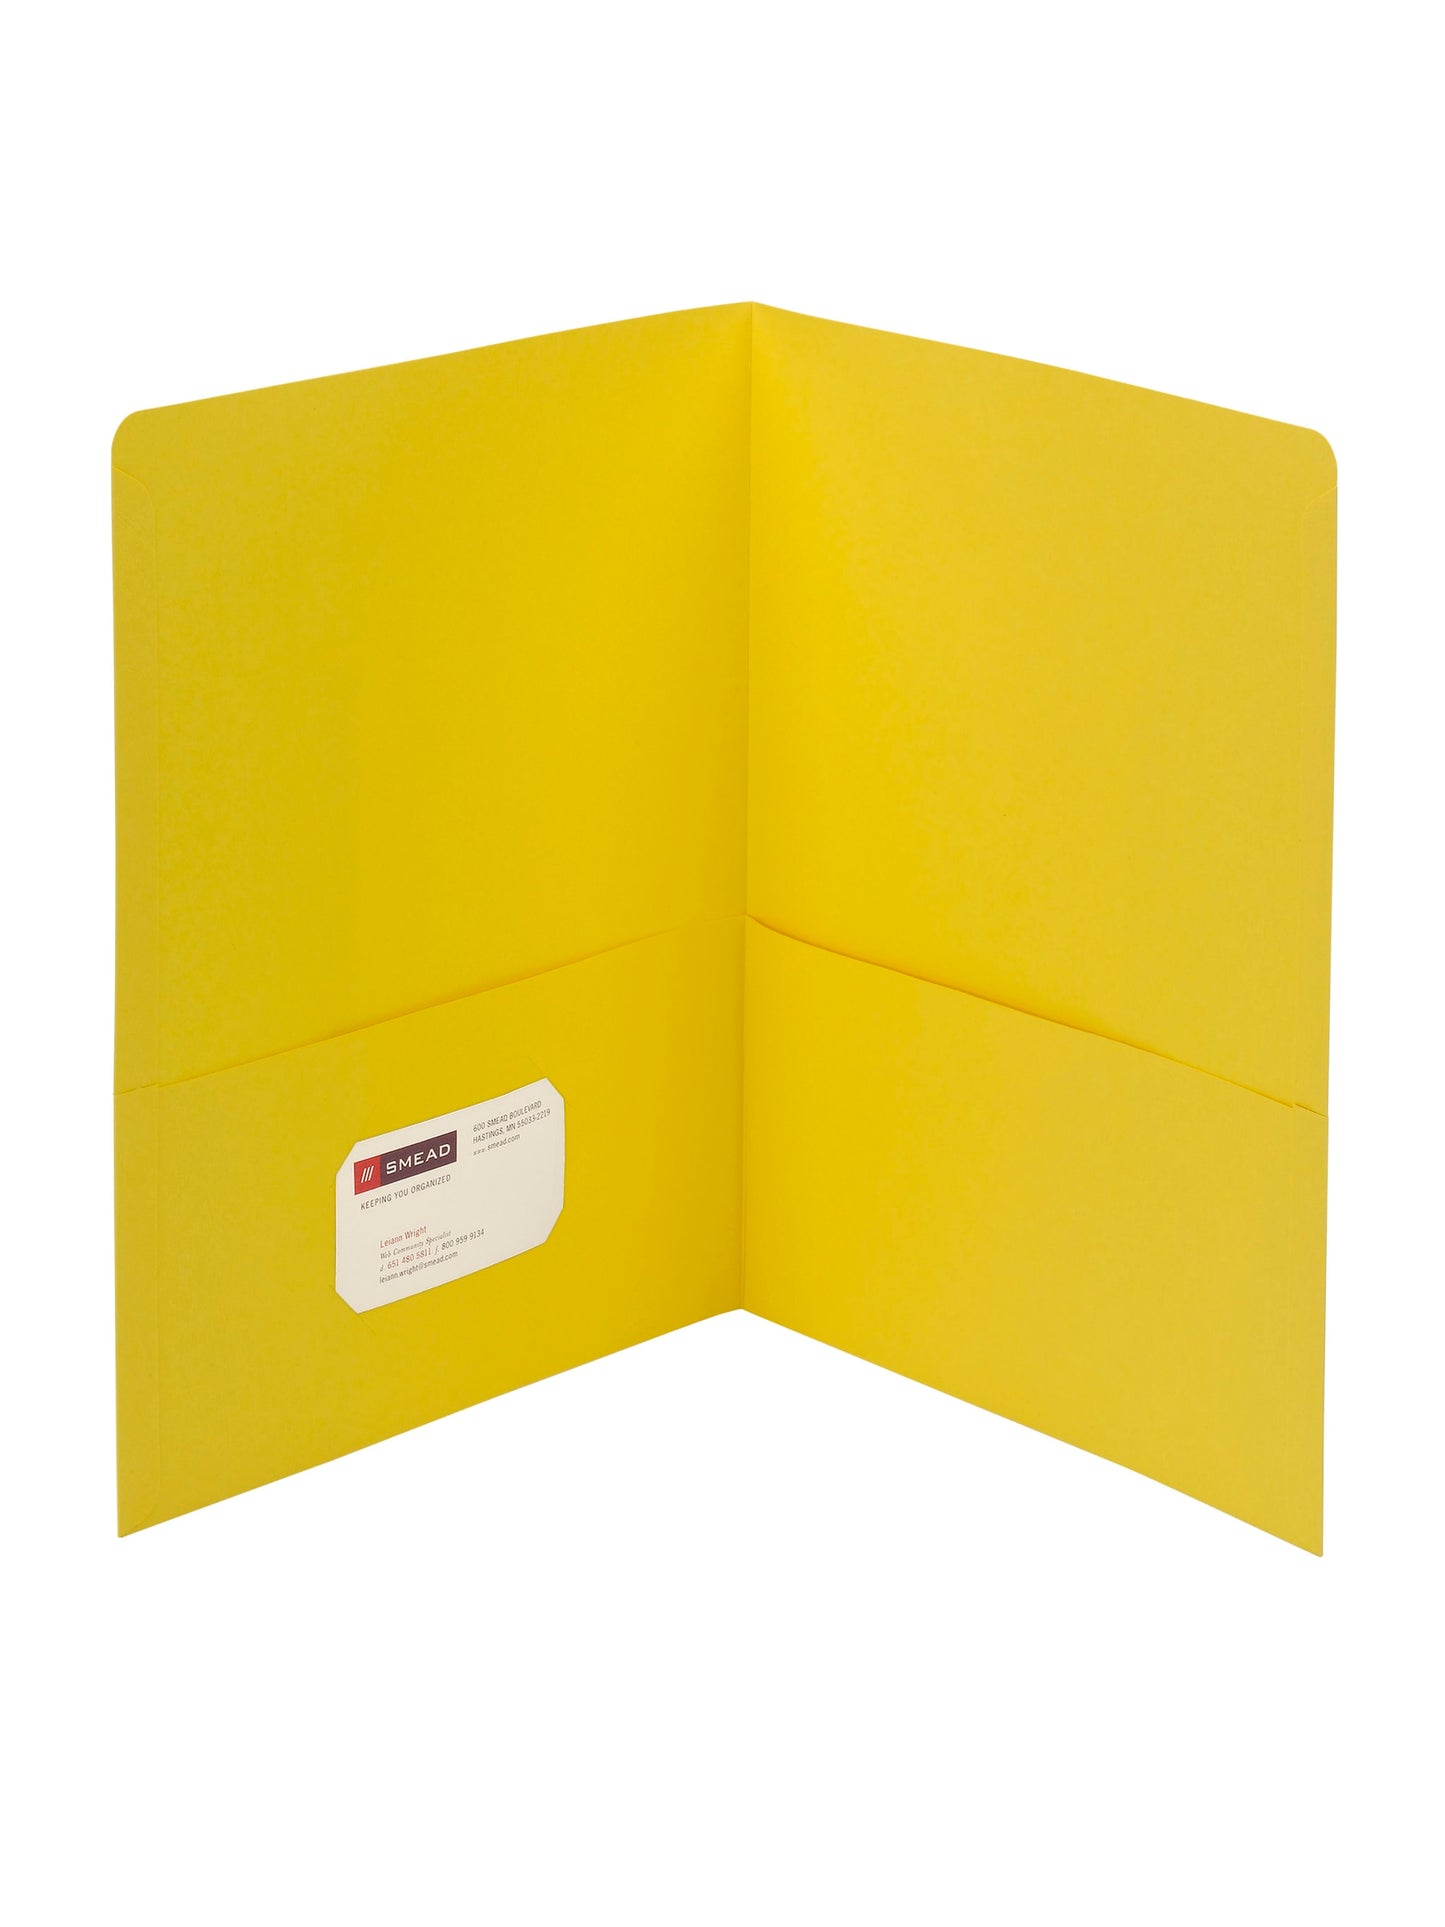 Standard Two-Pocket Folders, Yellow Color, Letter Size, Set of 0, 30086486878624